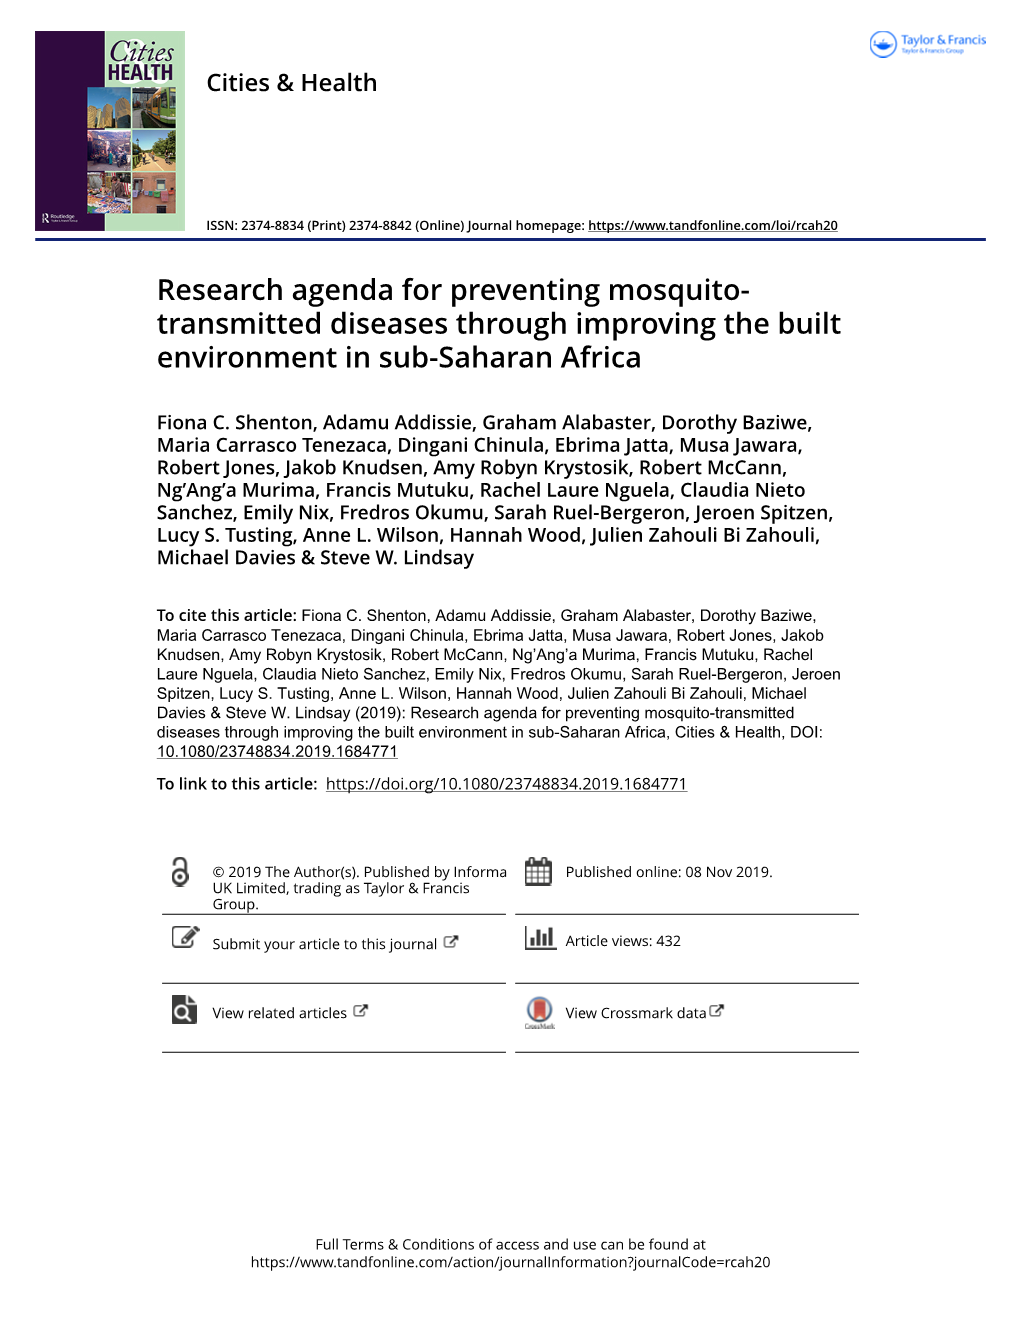 Research Agenda for Preventing Mosquito- Transmitted Diseases Through Improving the Built Environment in Sub-Saharan Africa